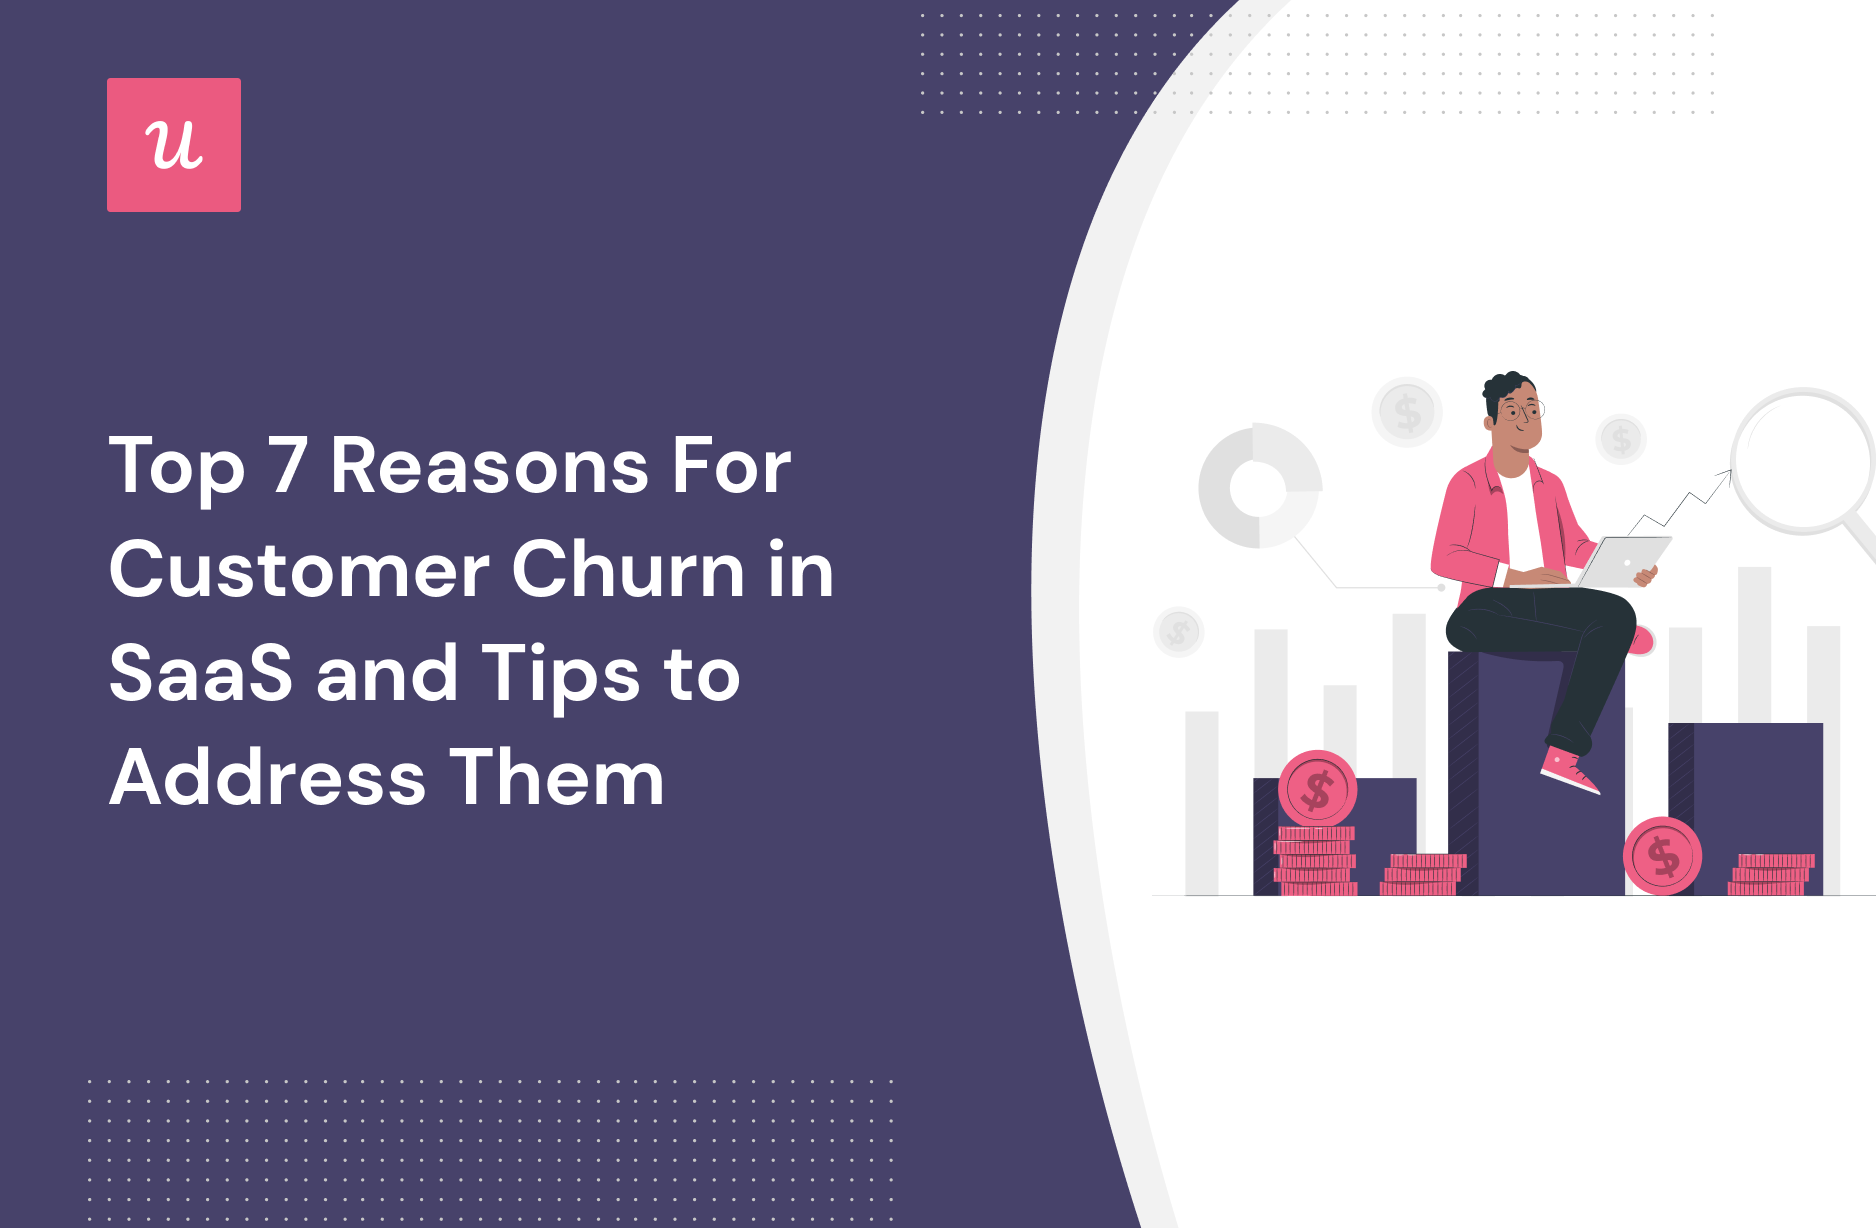 Top-7-Reasons-For-Customer-Churn-in-SaaS-and-Tips-to-Address-Them